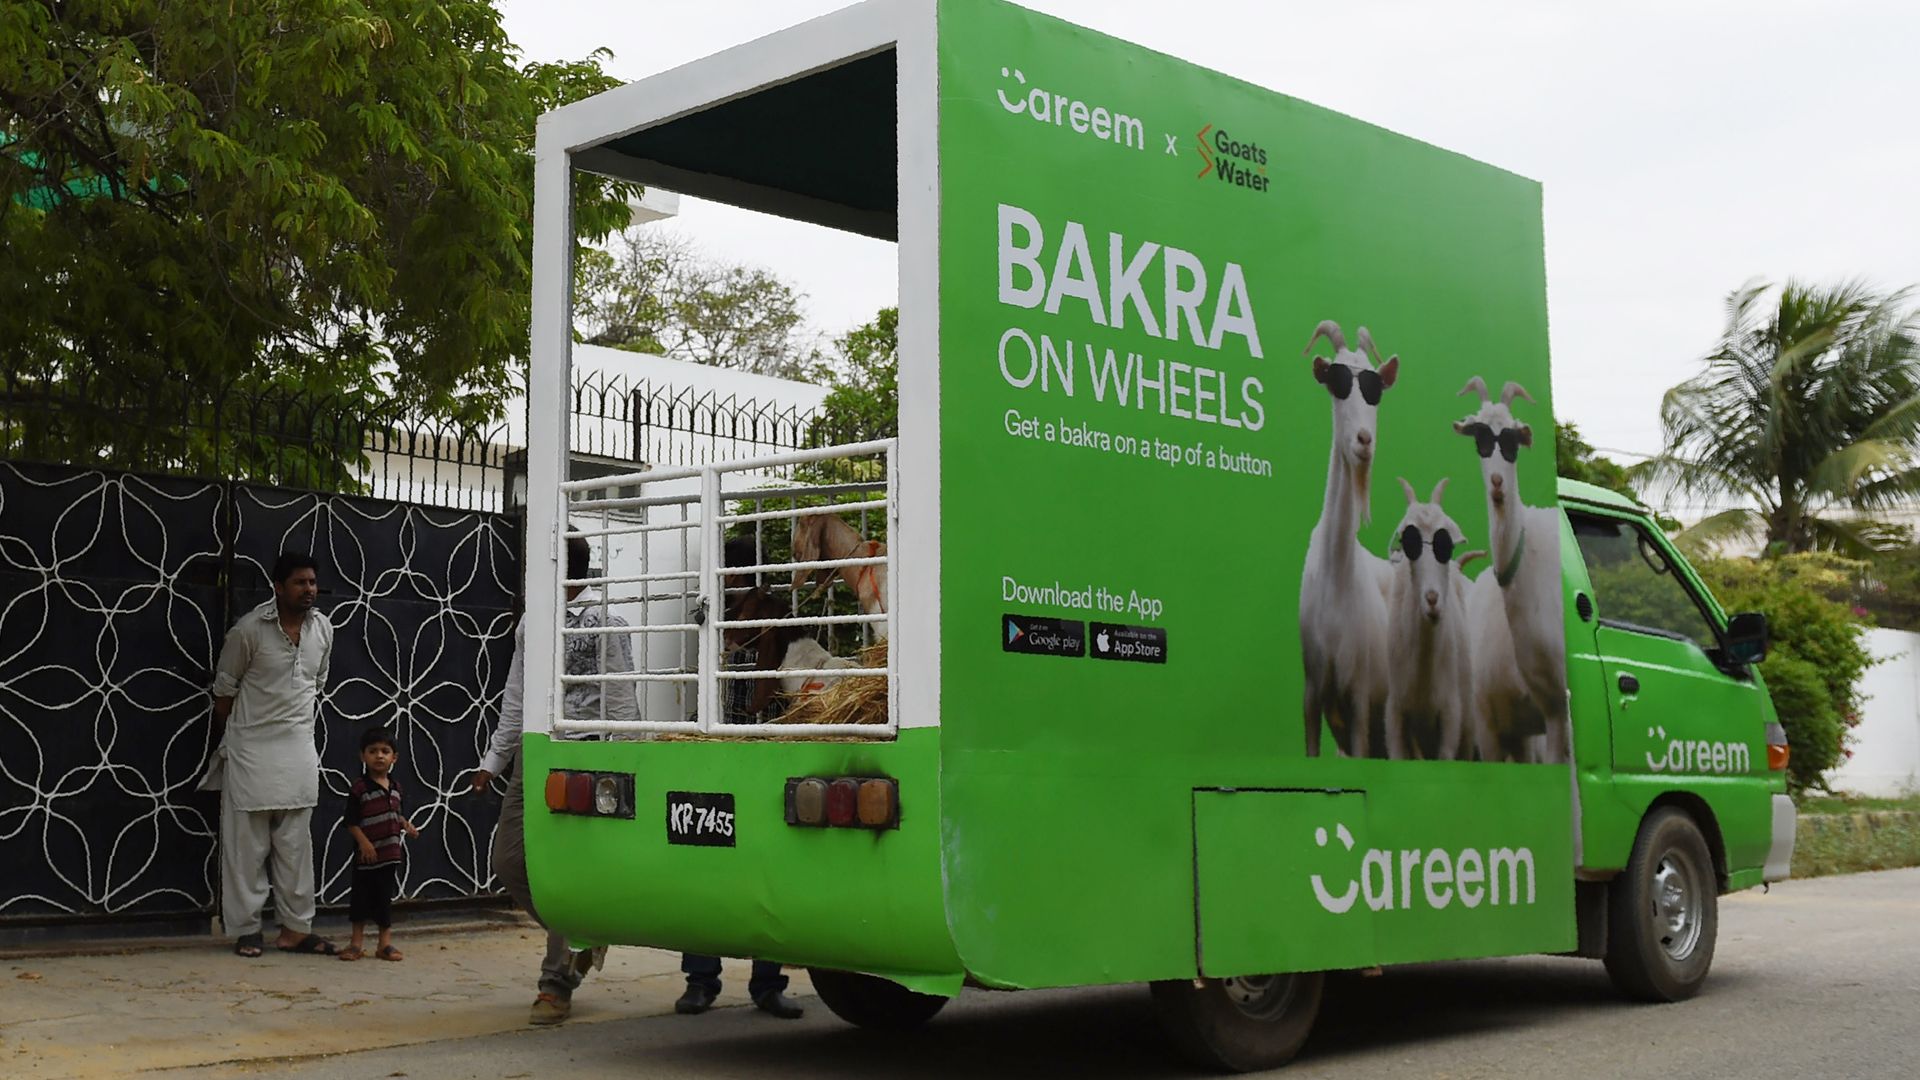 Careem's service 'Bakra on wheels' transports goats in a green truck